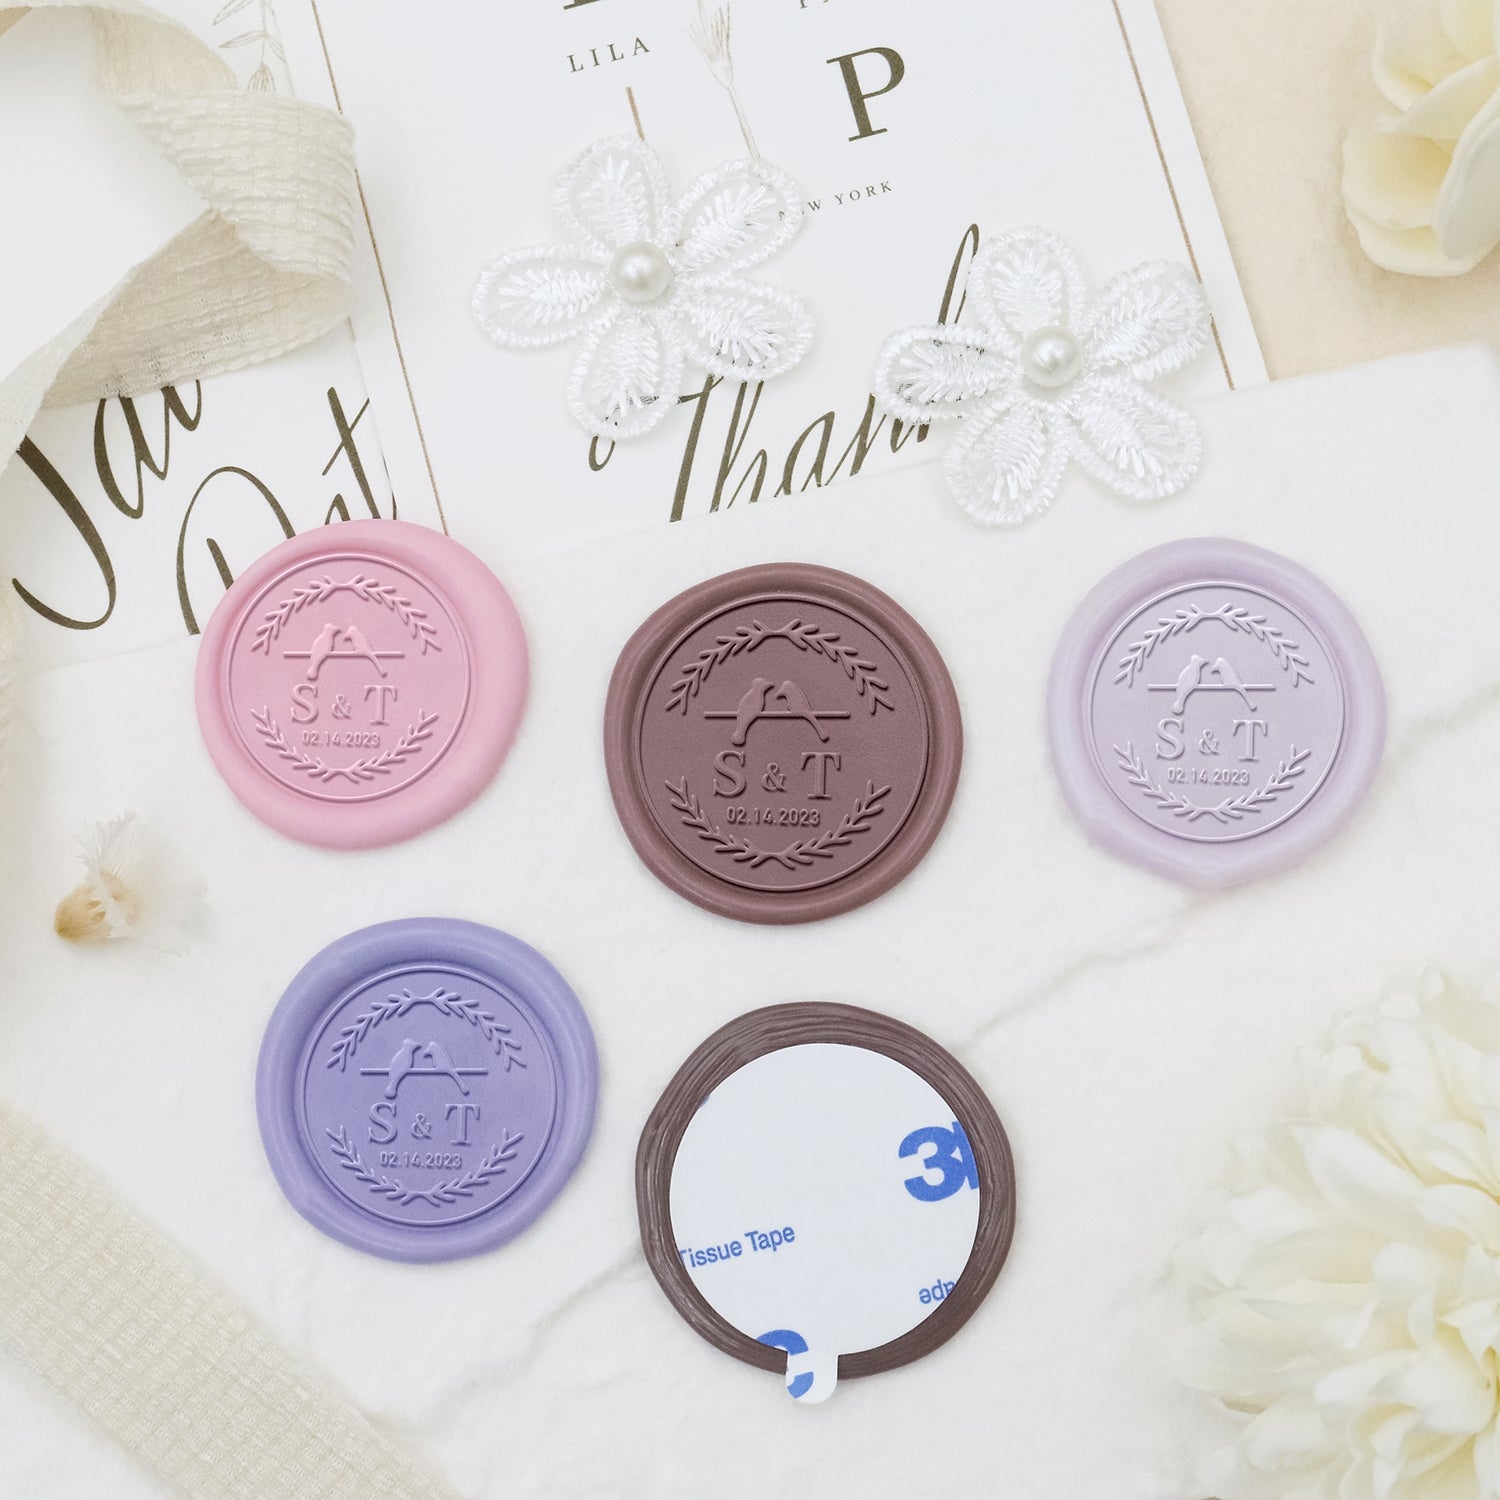 Stamprints Custom Lovebirds Wedding Name and Date Wax Seal Stickers 3